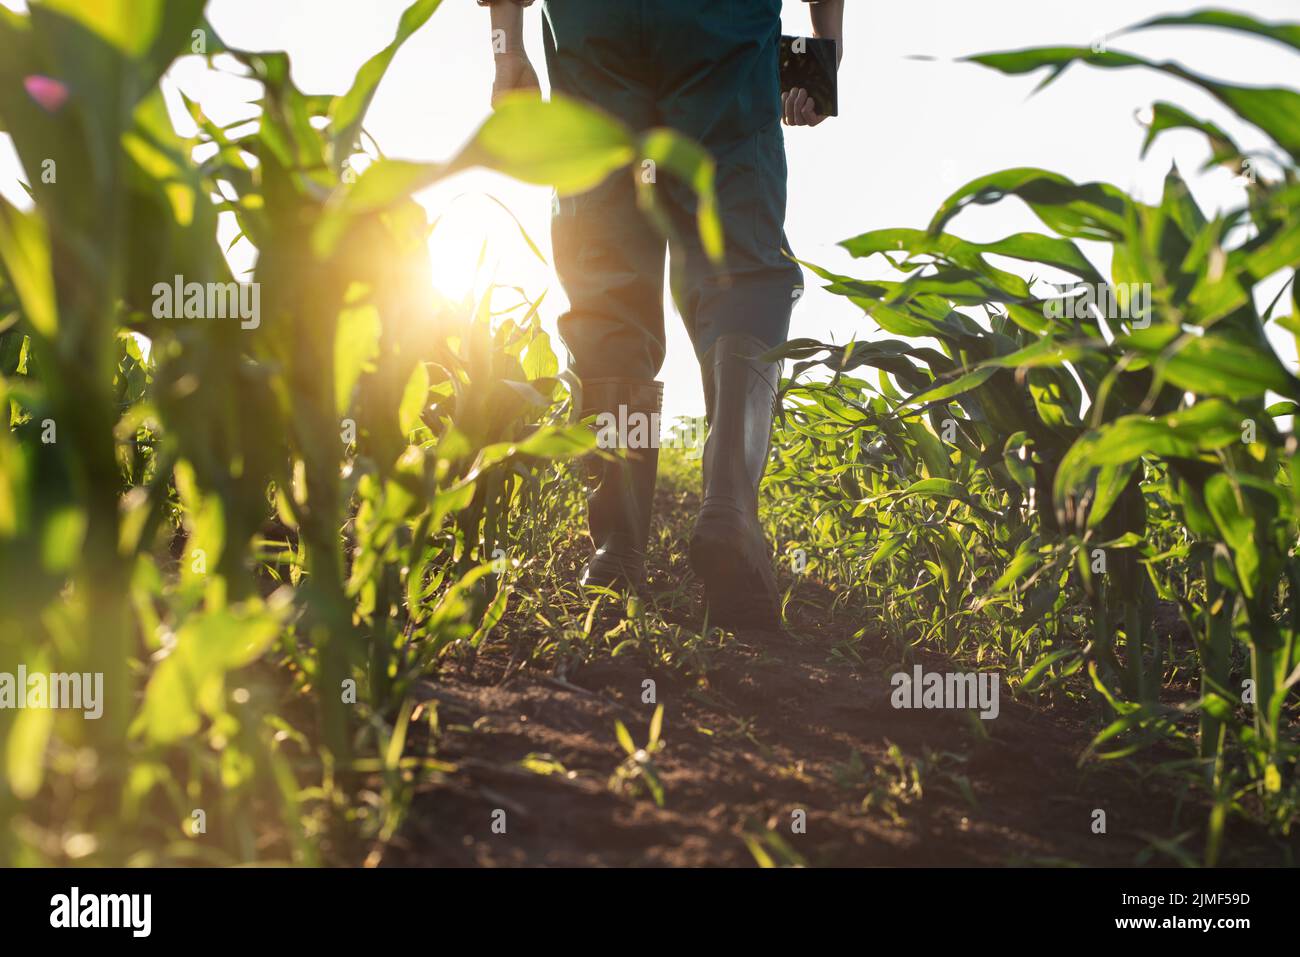 Low angle view at farmer feet in rubber boots walking along maize stalks Stock Photo